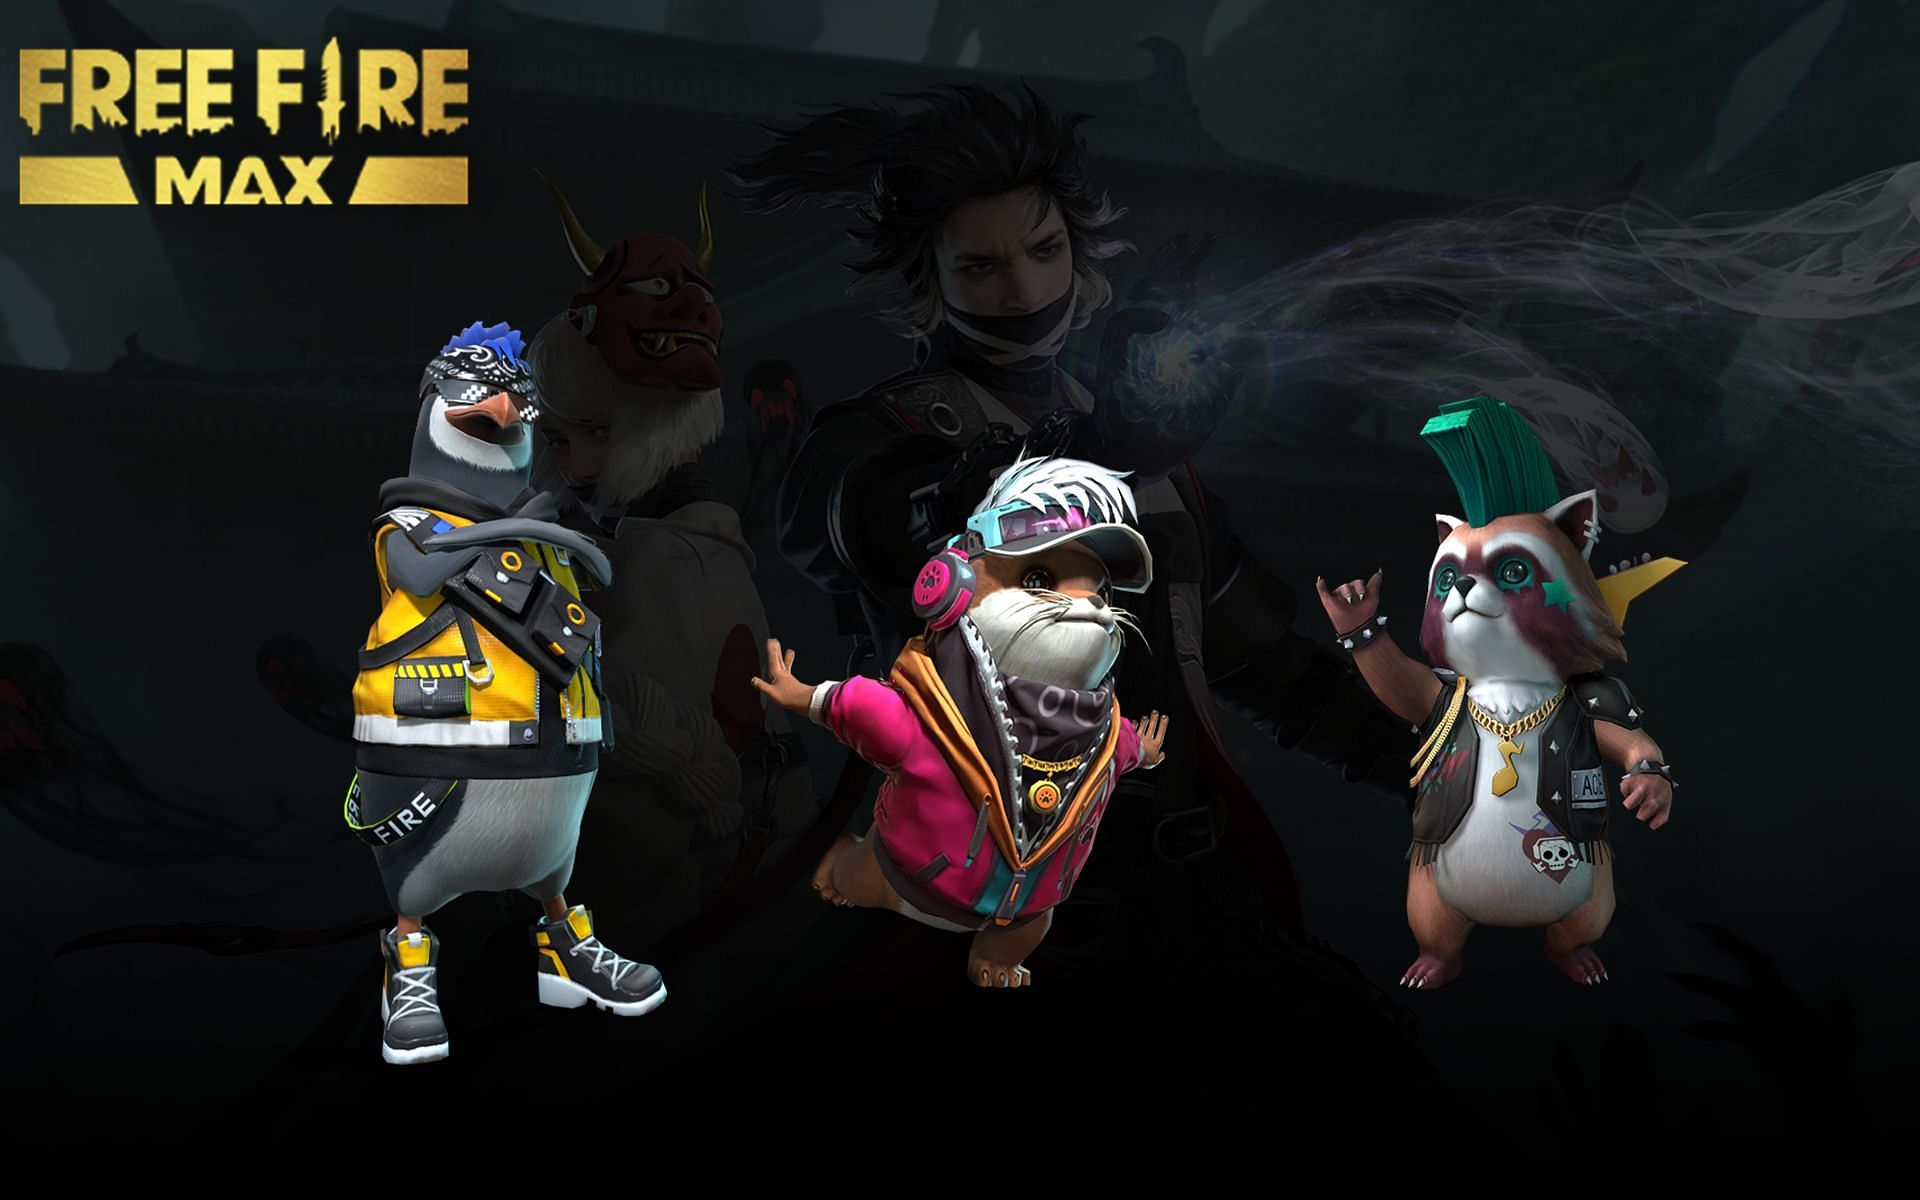 Some of the best pets in Free Fire MAX (Image via Sportskeeda)